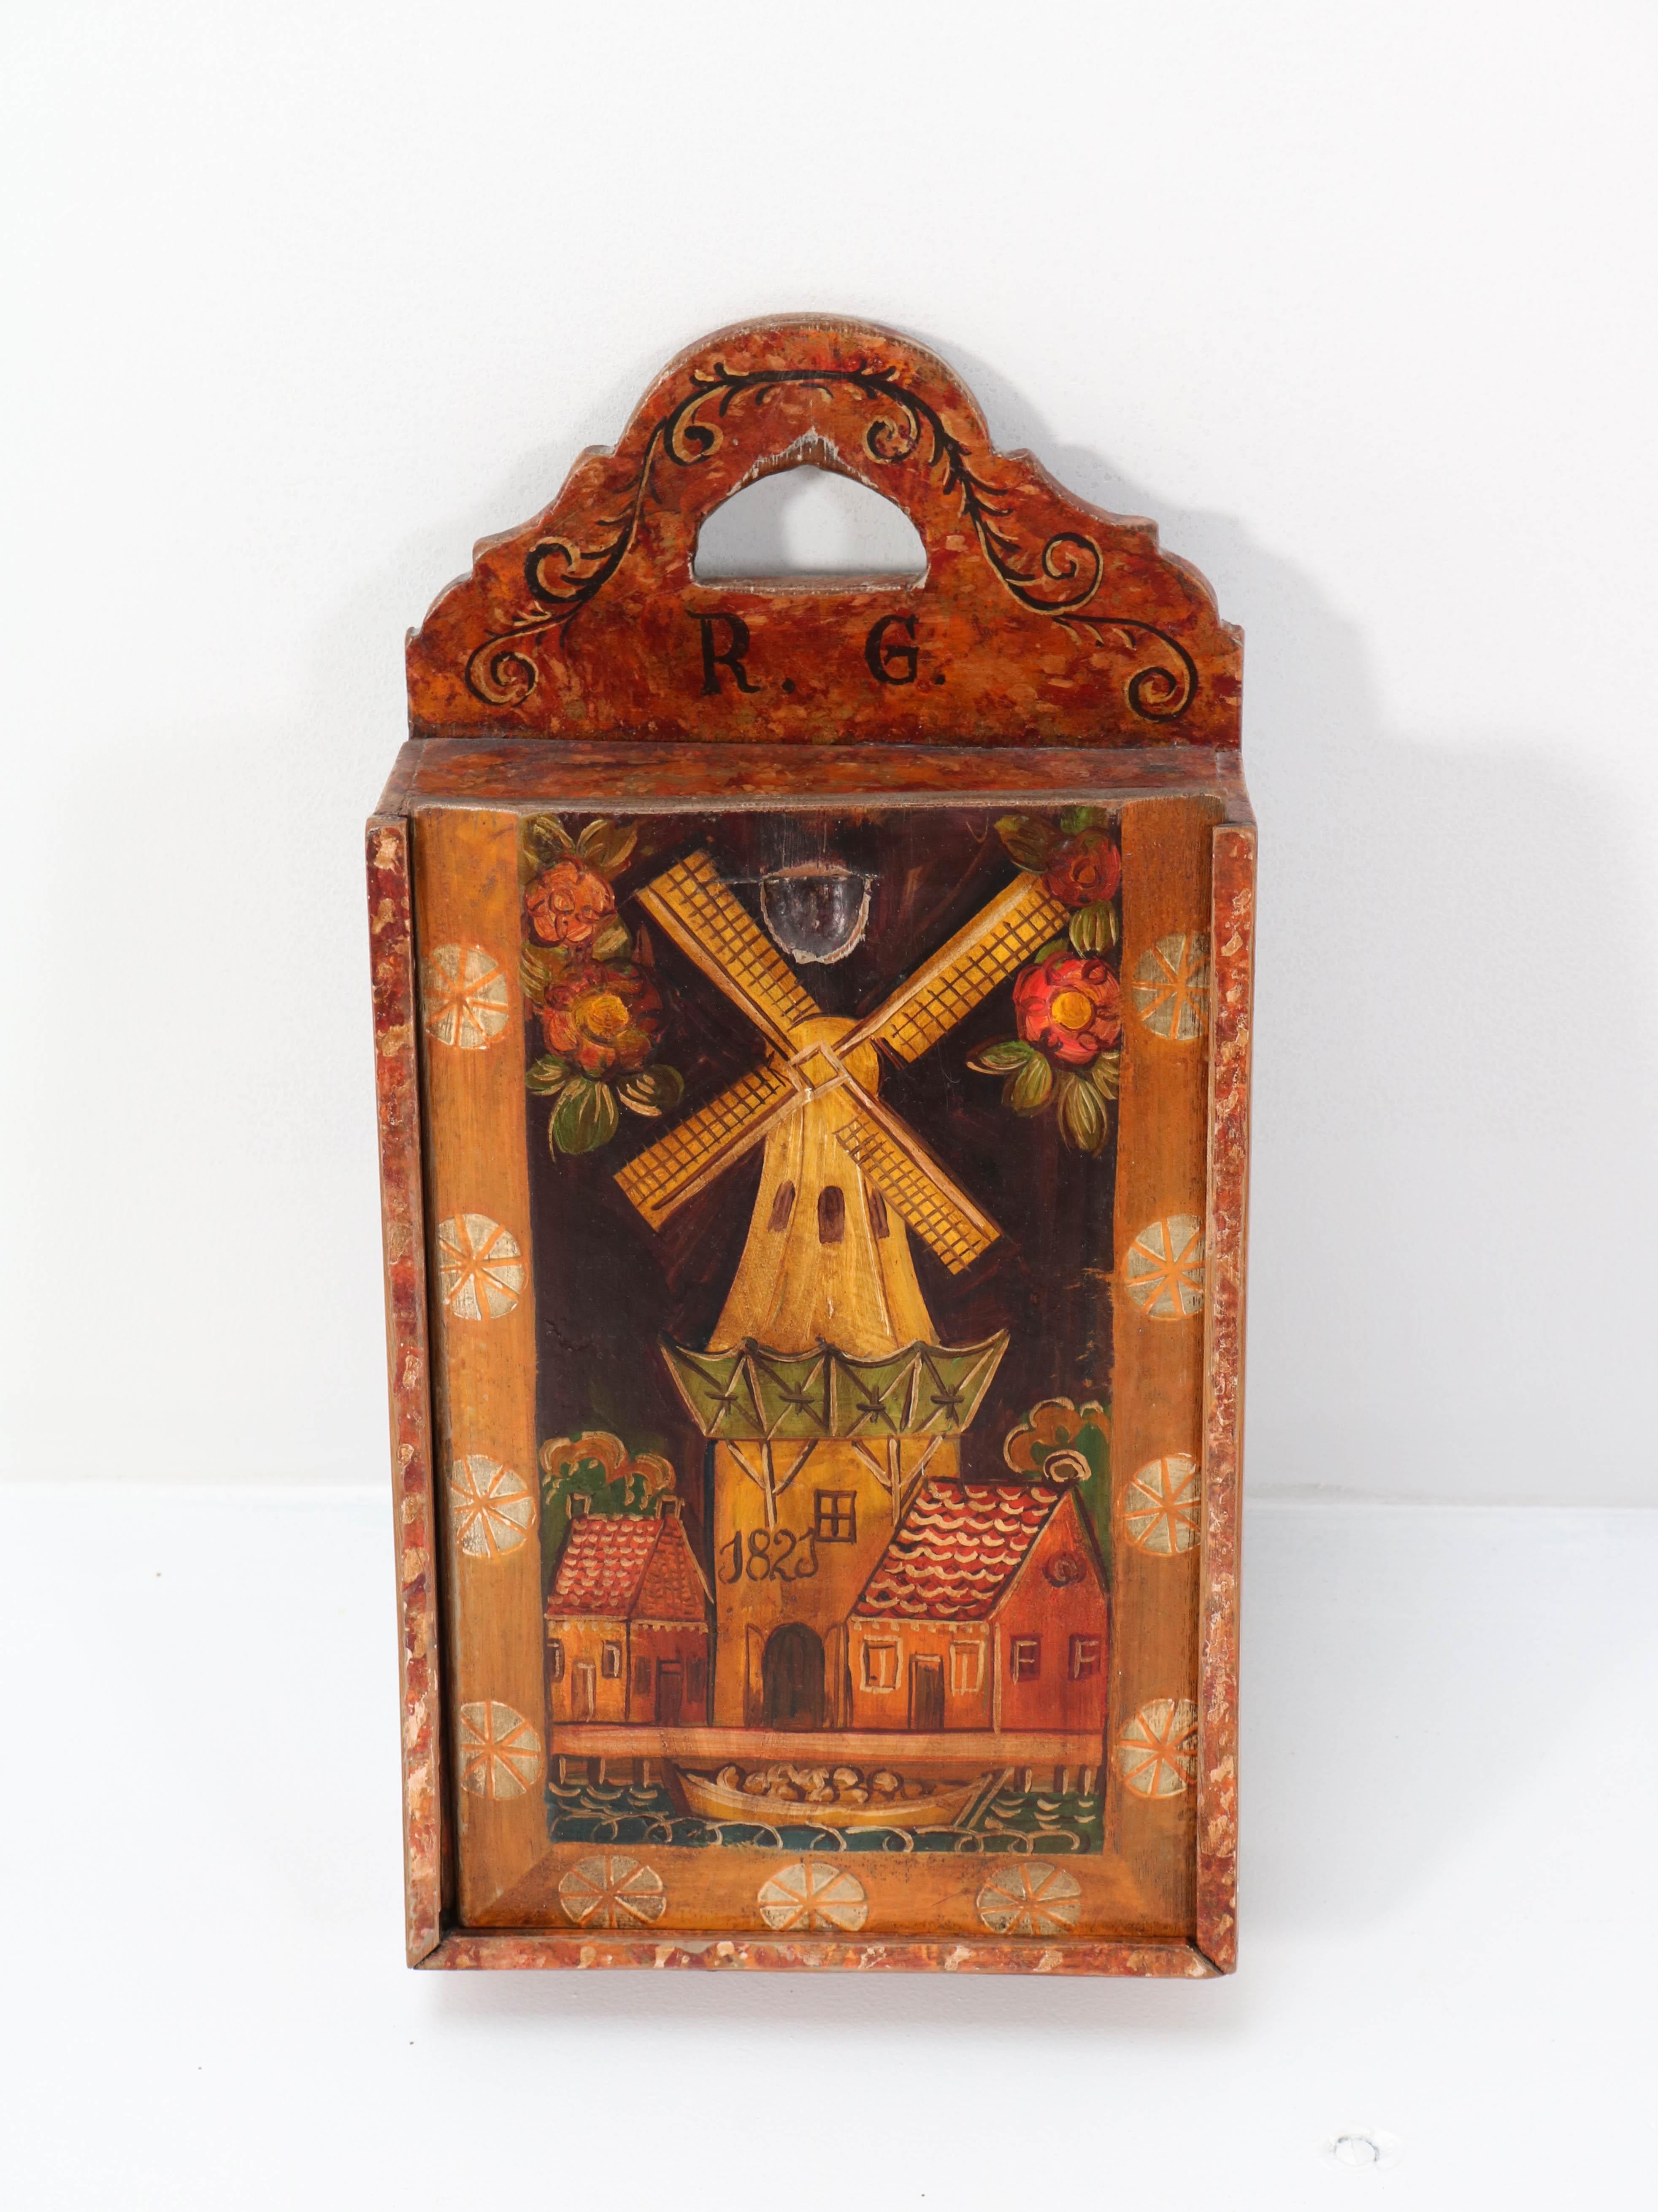 Magnificent and rare Antique Folk Art school box.
Striking Dutch design from 1823.
Hand-painted in Hindeloopen style.
Ultra rare with the image of the Dutch wind mill!
Almost 200 years old and in top condition with a beautiful patina!
     